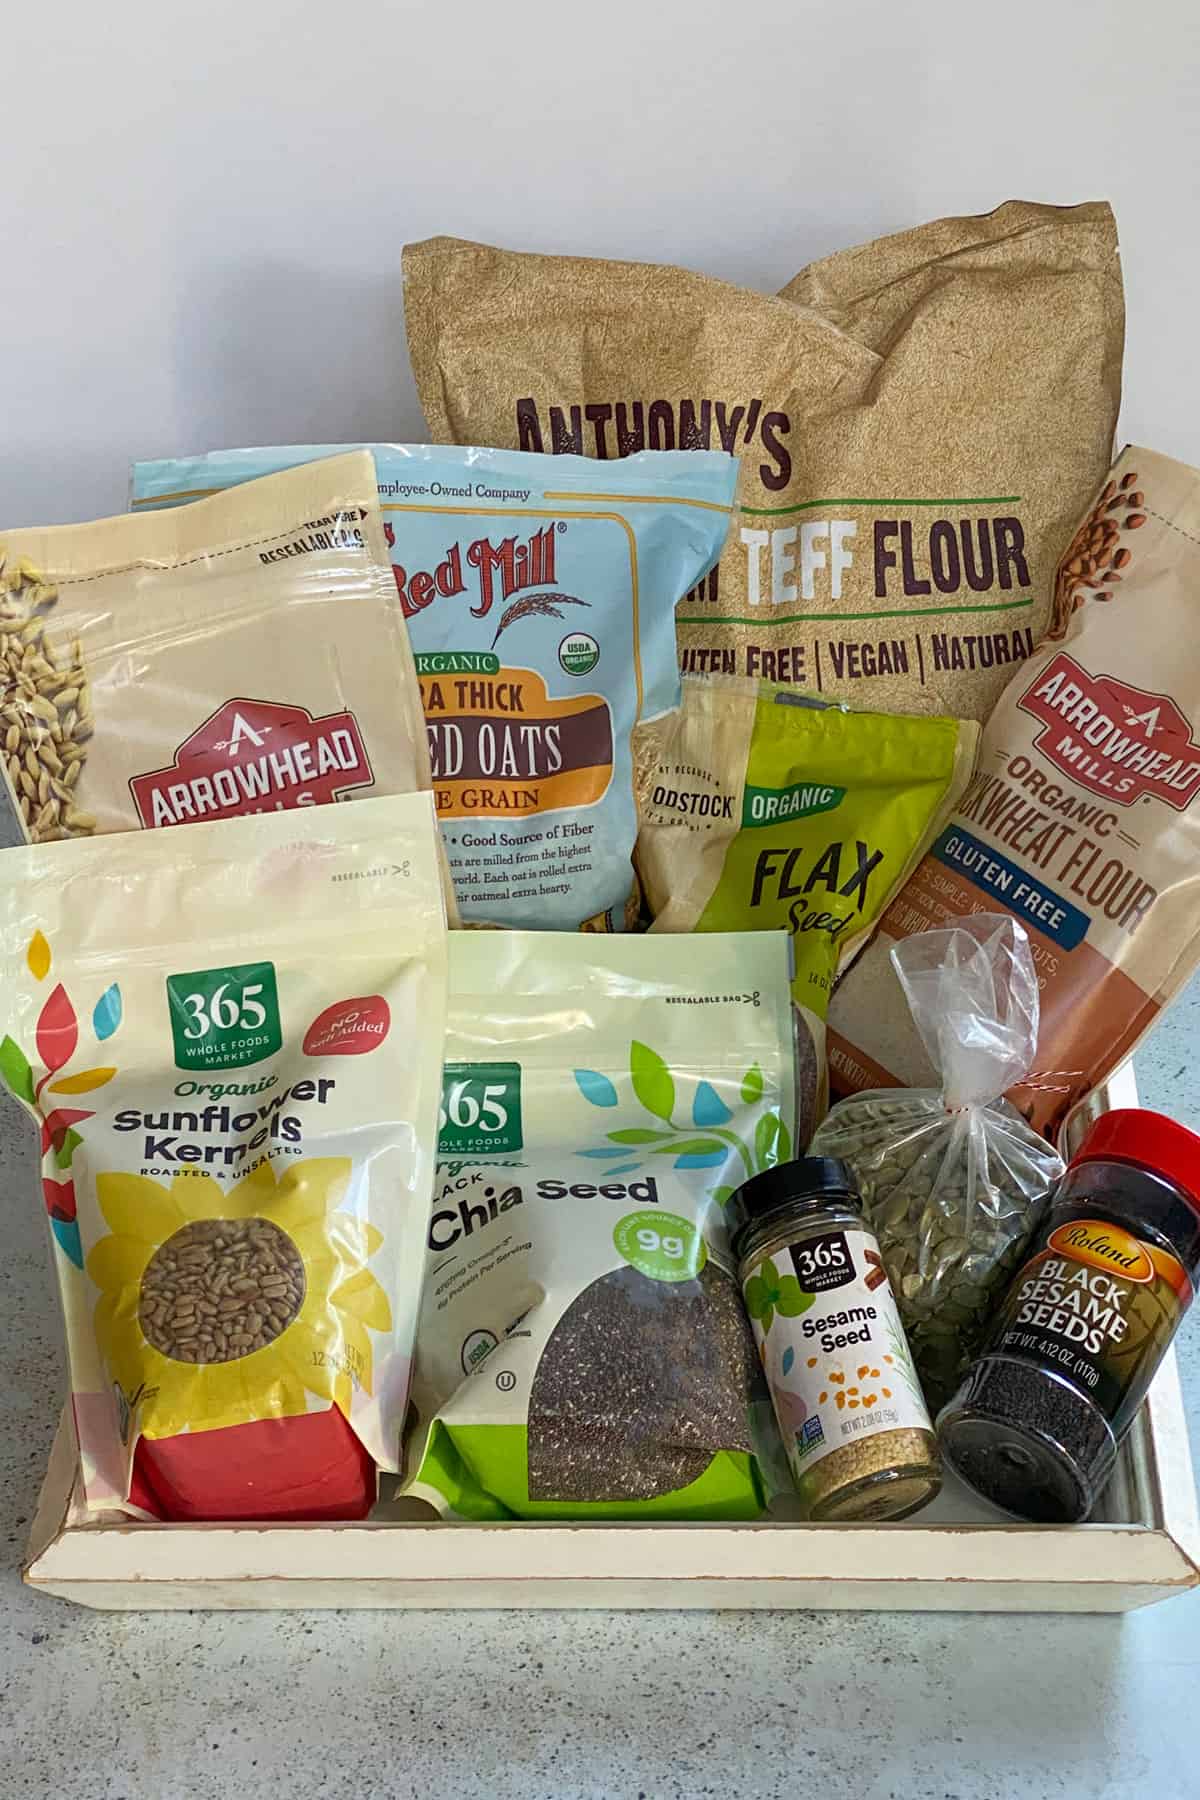 8 bags of different types of flour and seeds, all on a white tray